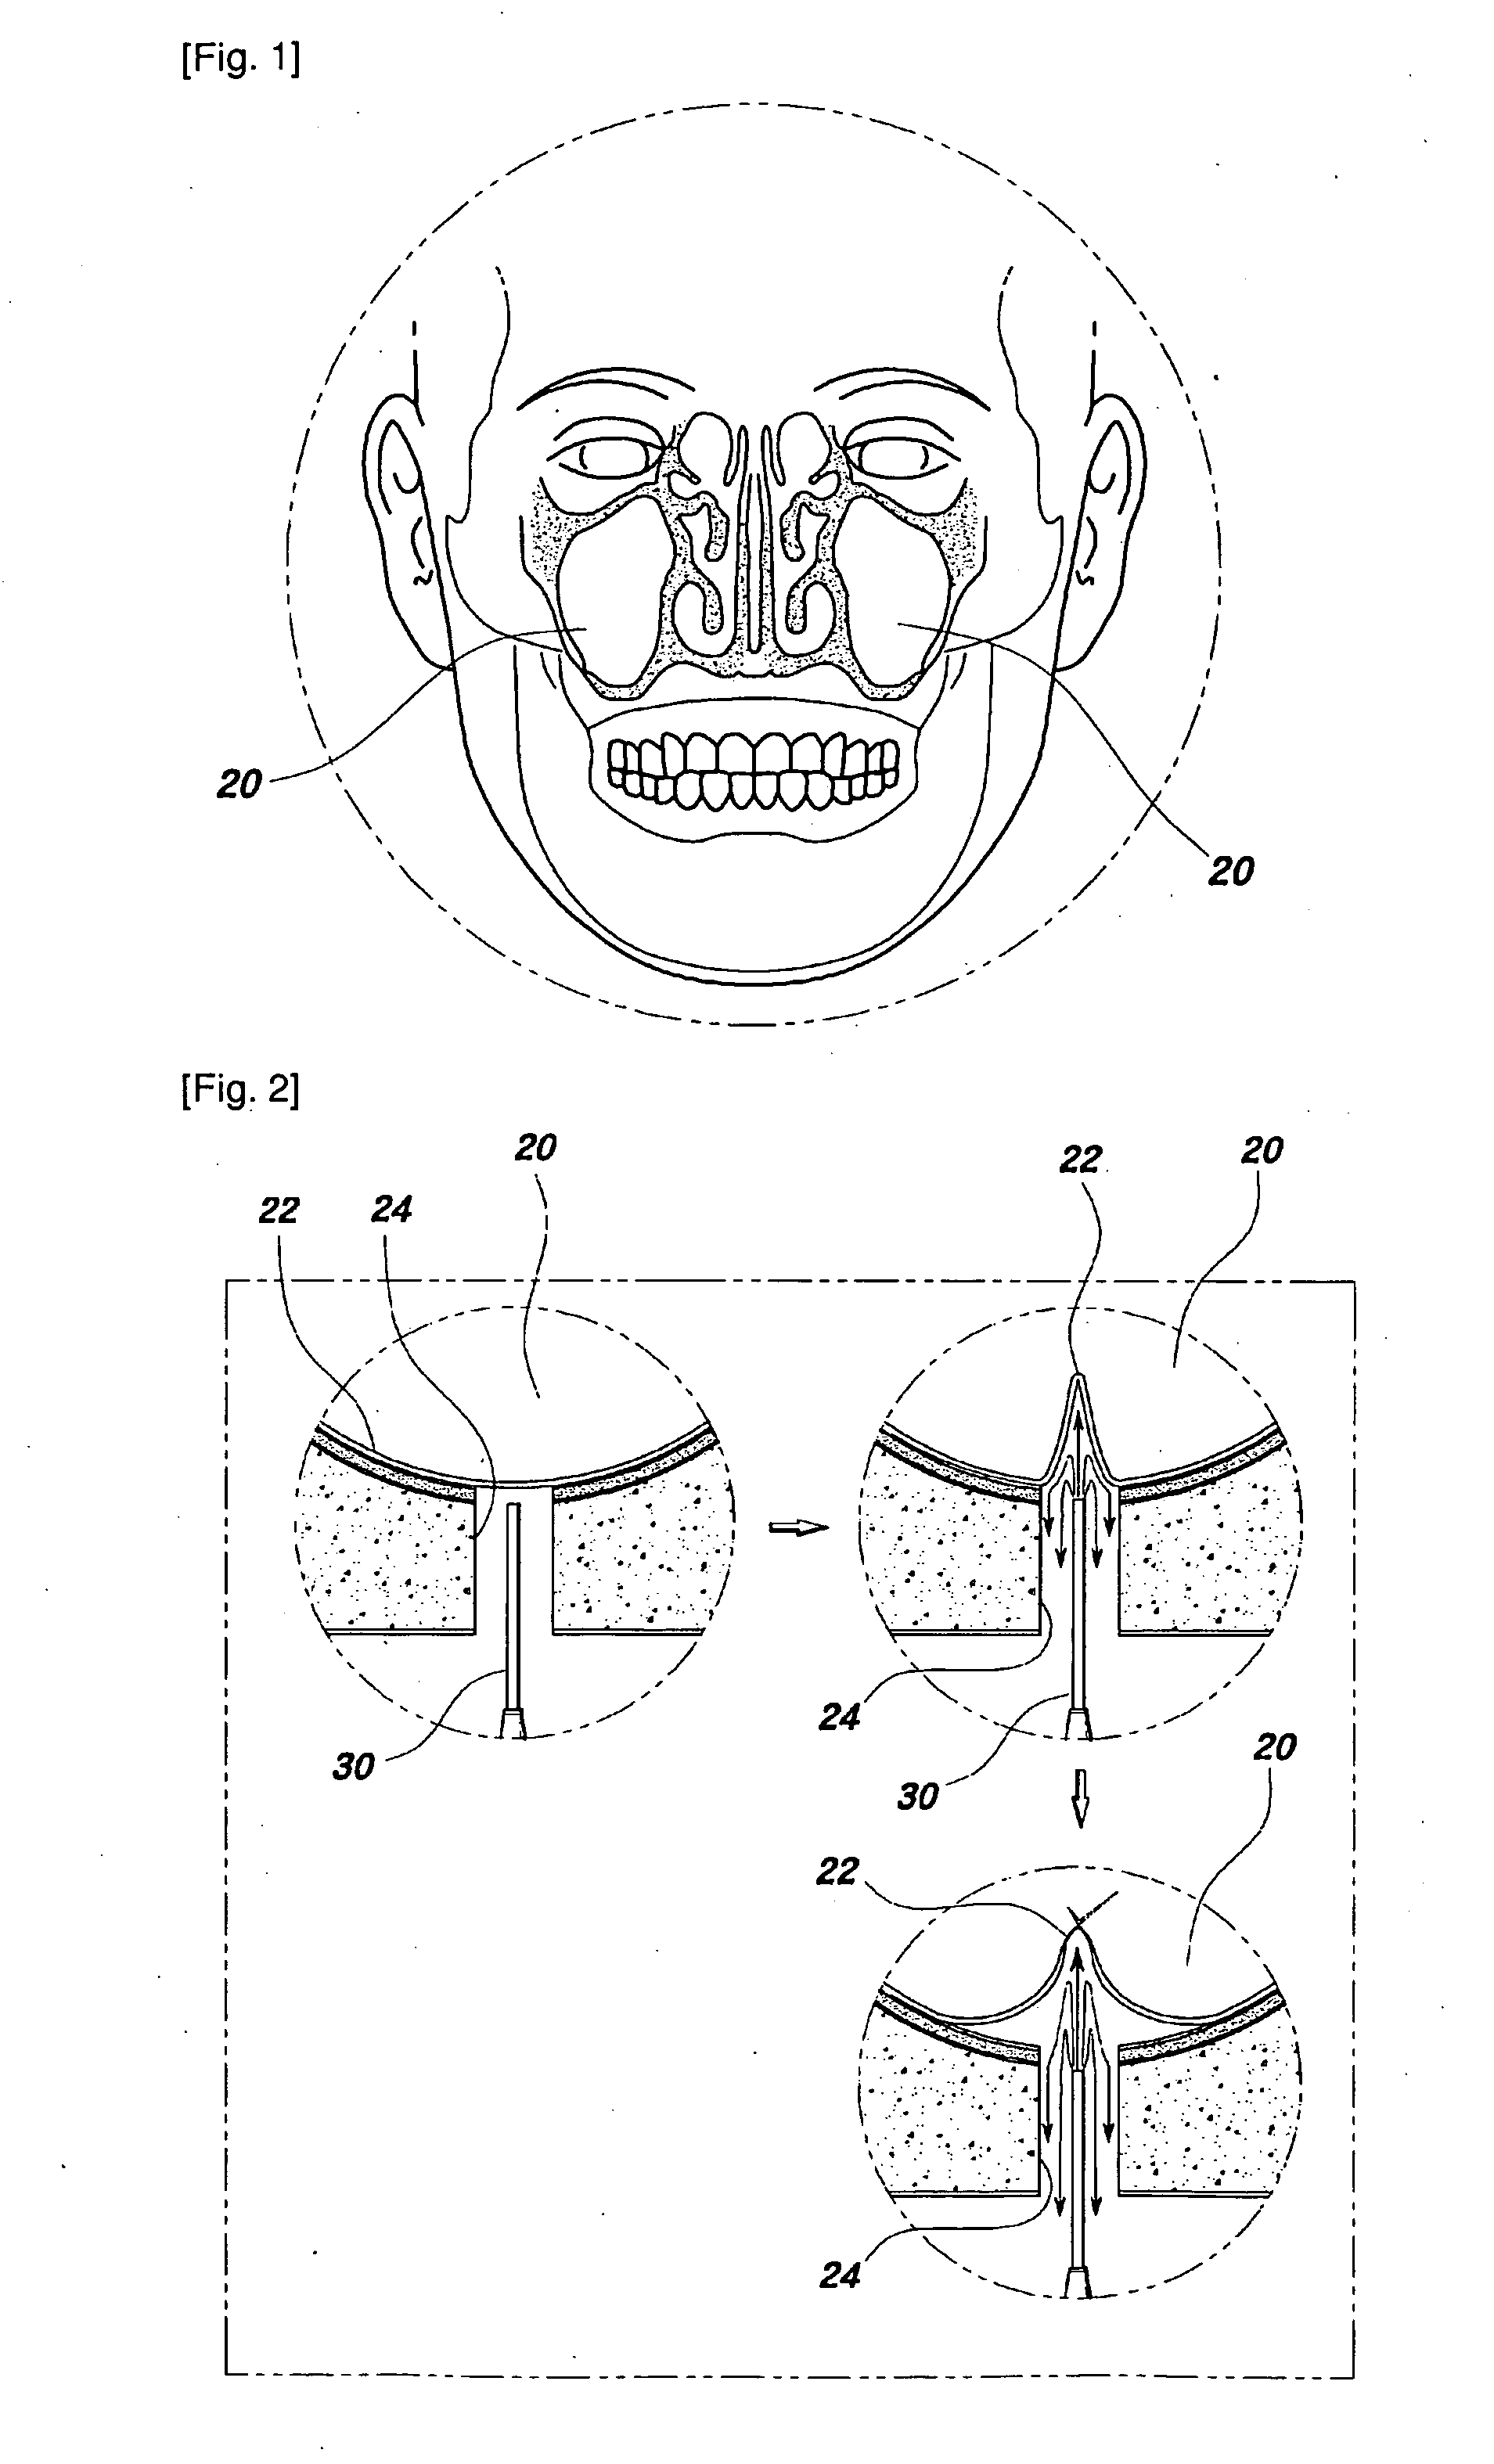 Apparatus of liquid injecting for lifting maxillary sinus mucous membrance and the method for the same utilizing this apparatus